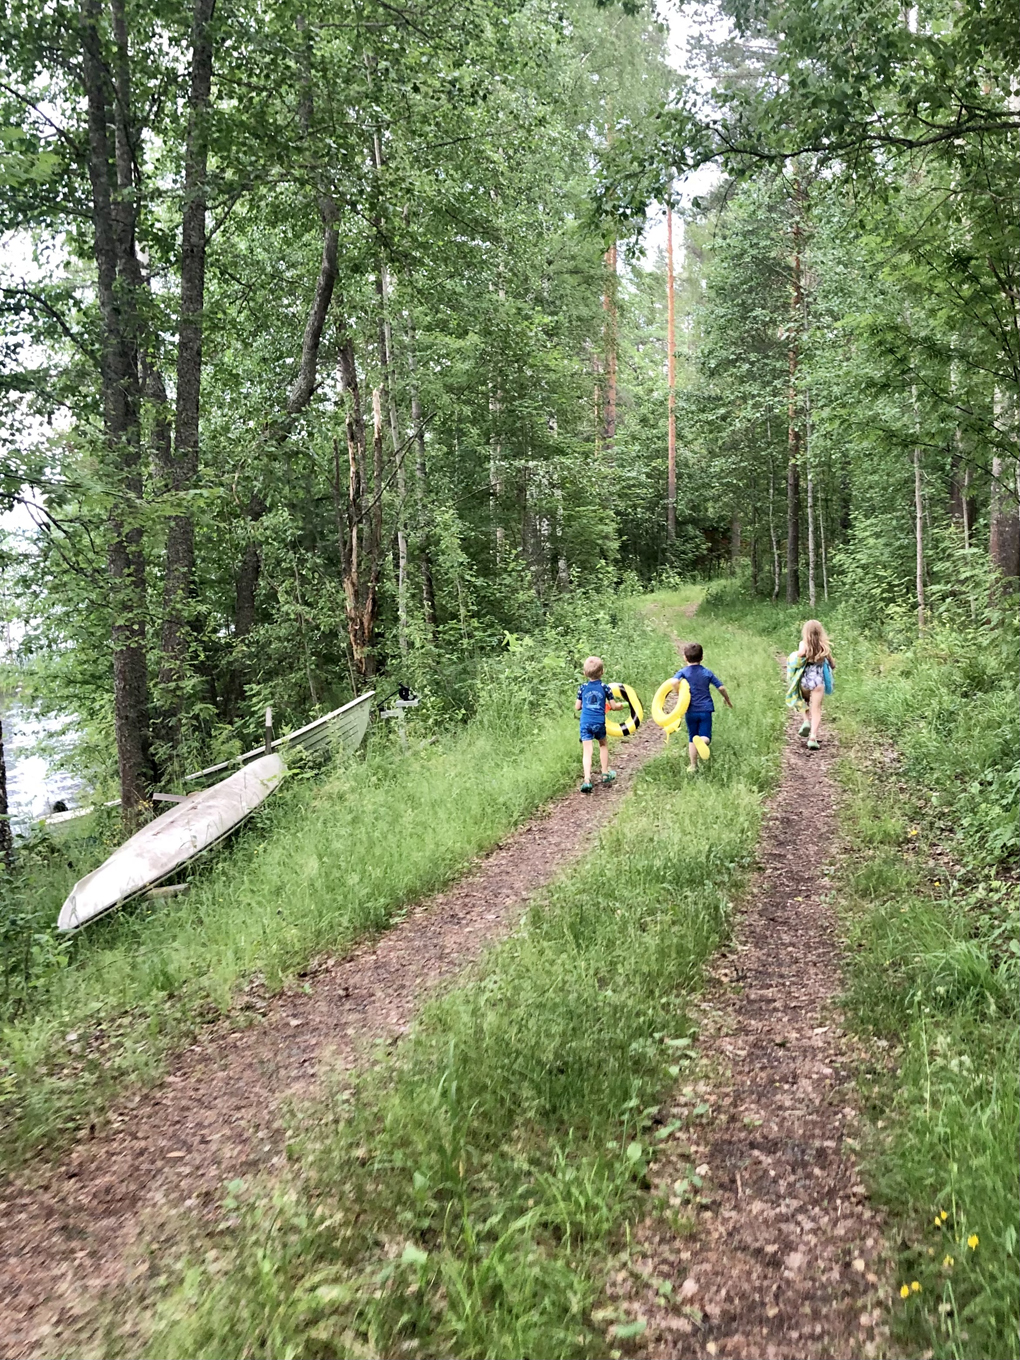 Three children running along a forest road with swimming toys.